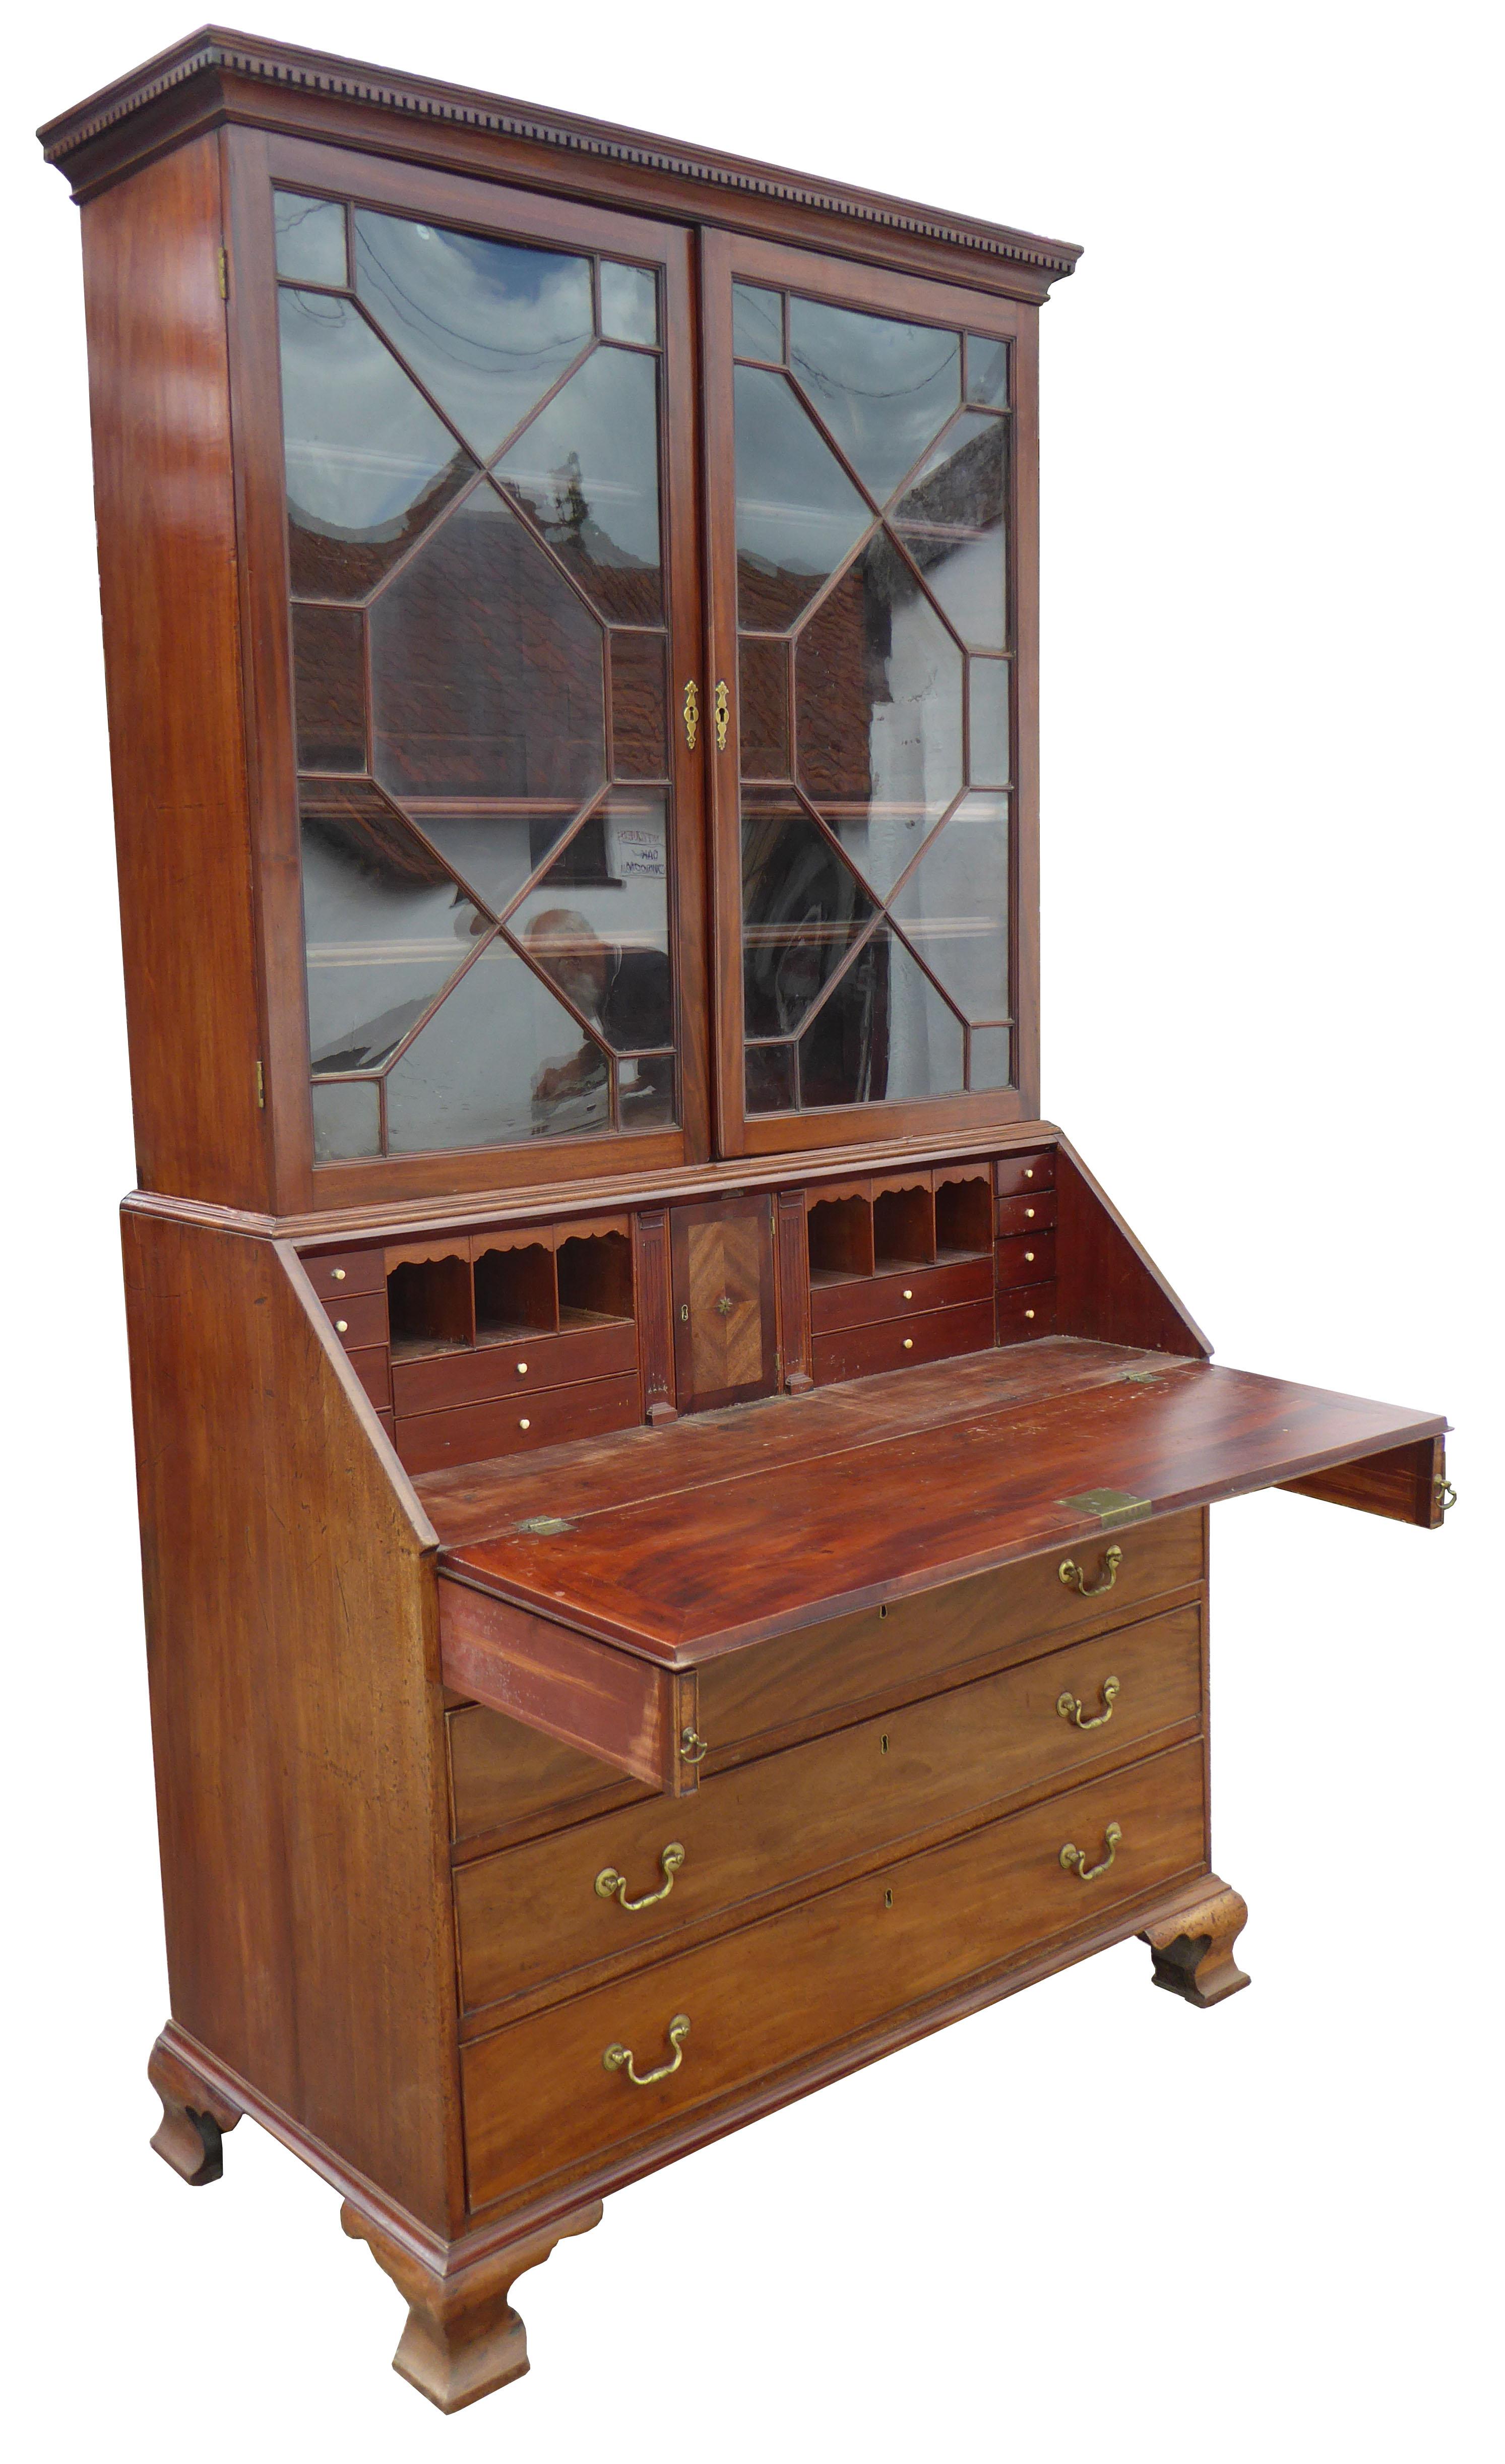 For sale is a good quality George III mahogany Bureau bookcase. The bookcase top has two astregal glazed doors, opening to reveal adjustable shelves. Below this is a fall front, opening to a fully fitted interior consisting of various drawers,